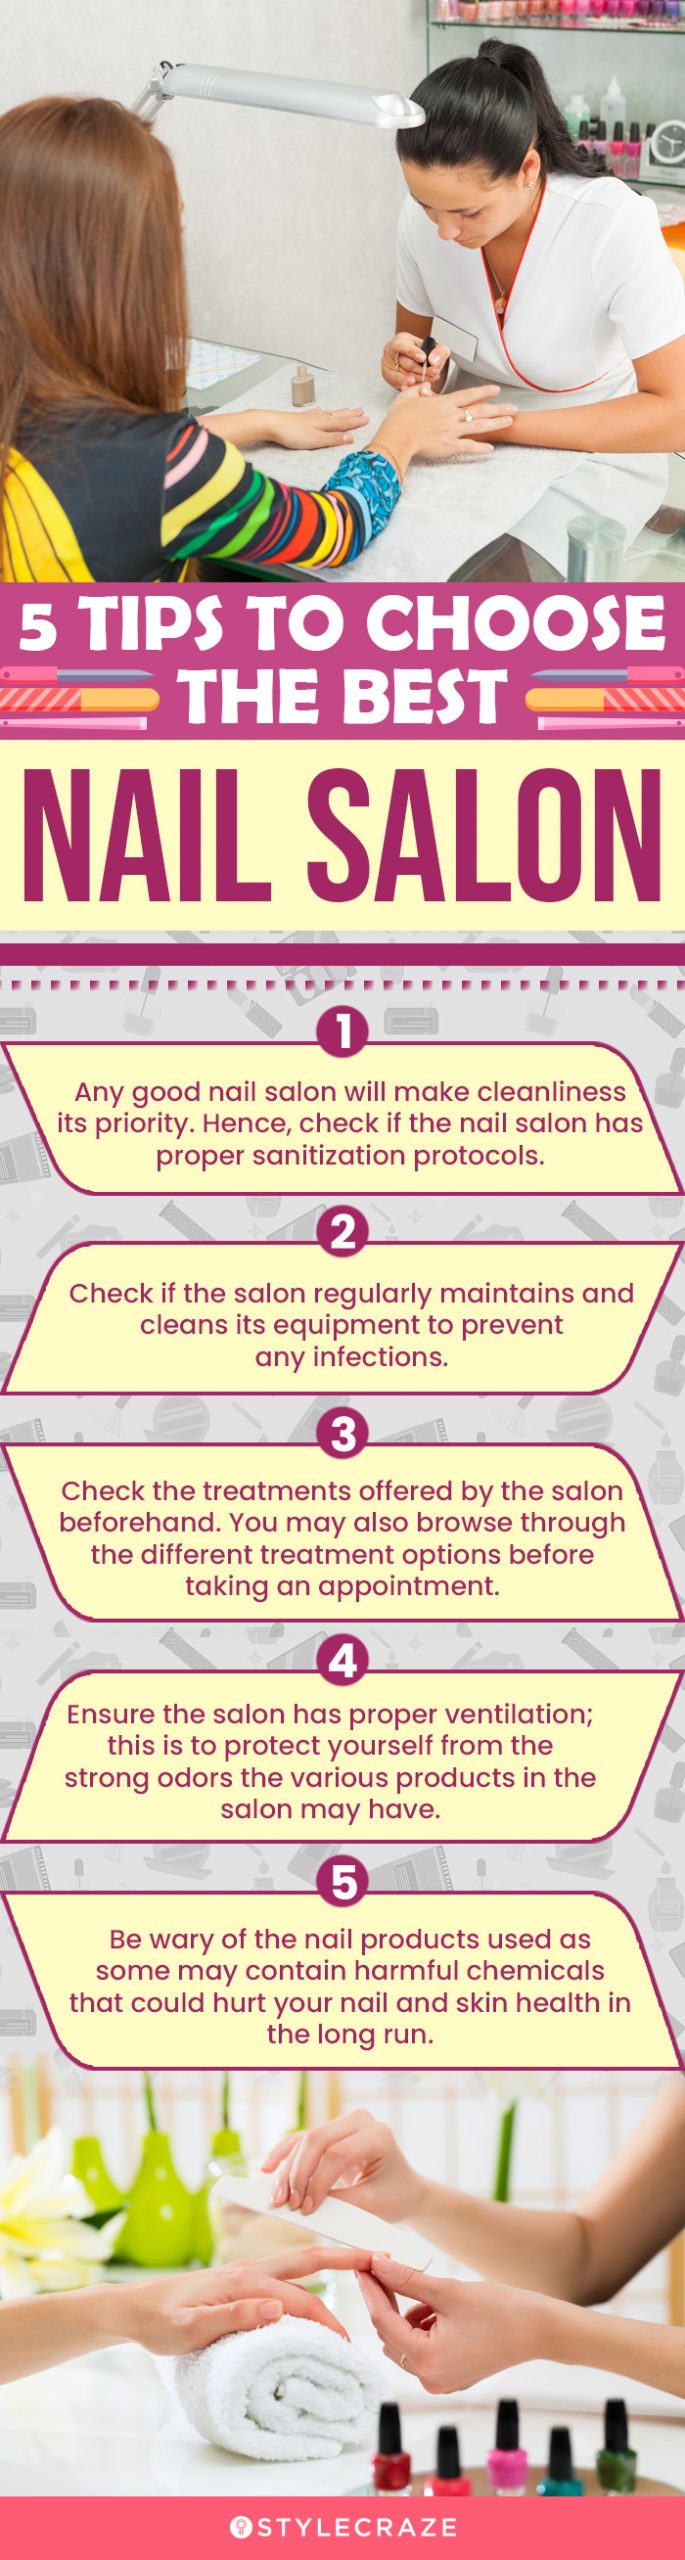 5 tips to choose the best nail salon (infographic)